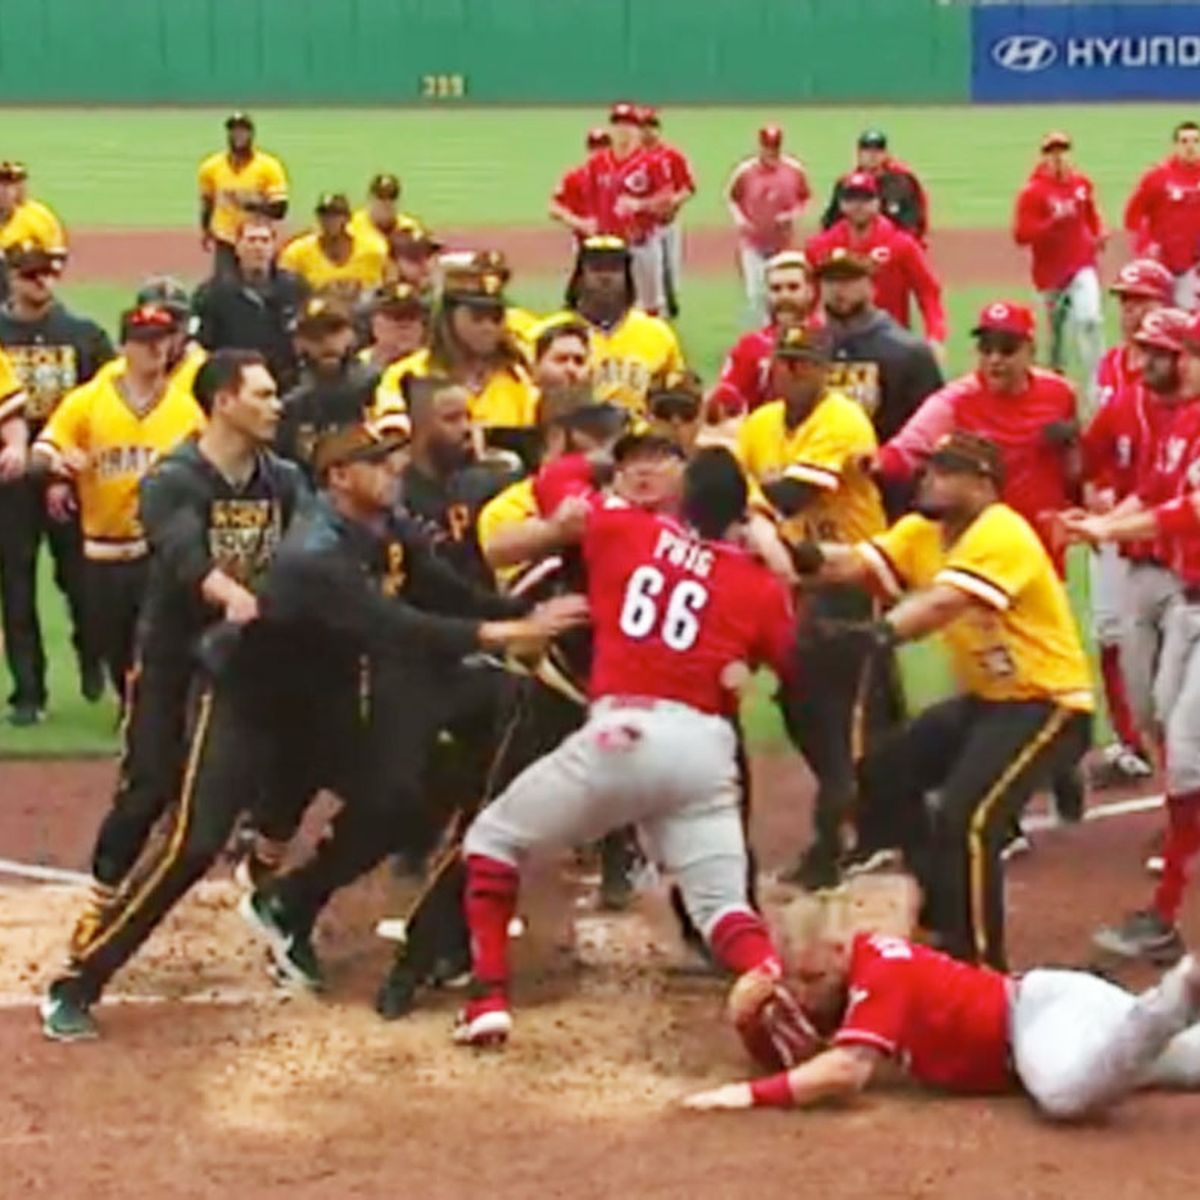 MLB star Yasiel Puig tries to fight entire Pittsburgh Pirates